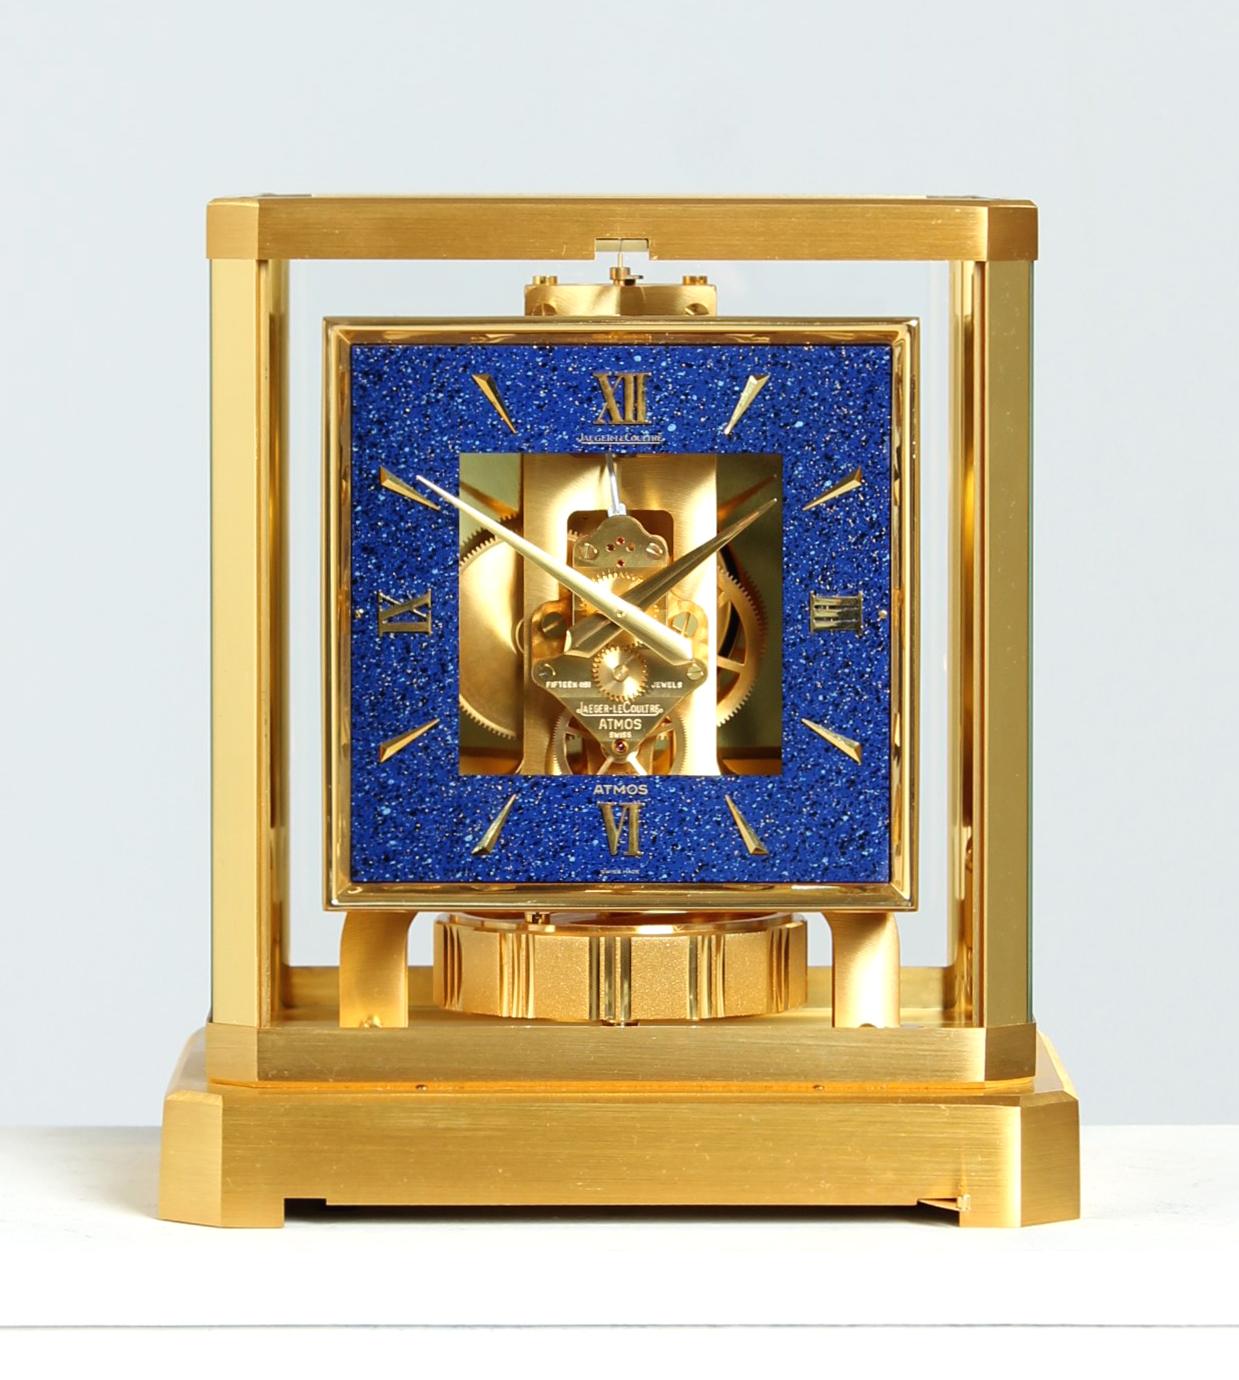 Late 20th Century Jaeger LeCoultre, Atmos Clock with Lapis Lazuli Dial